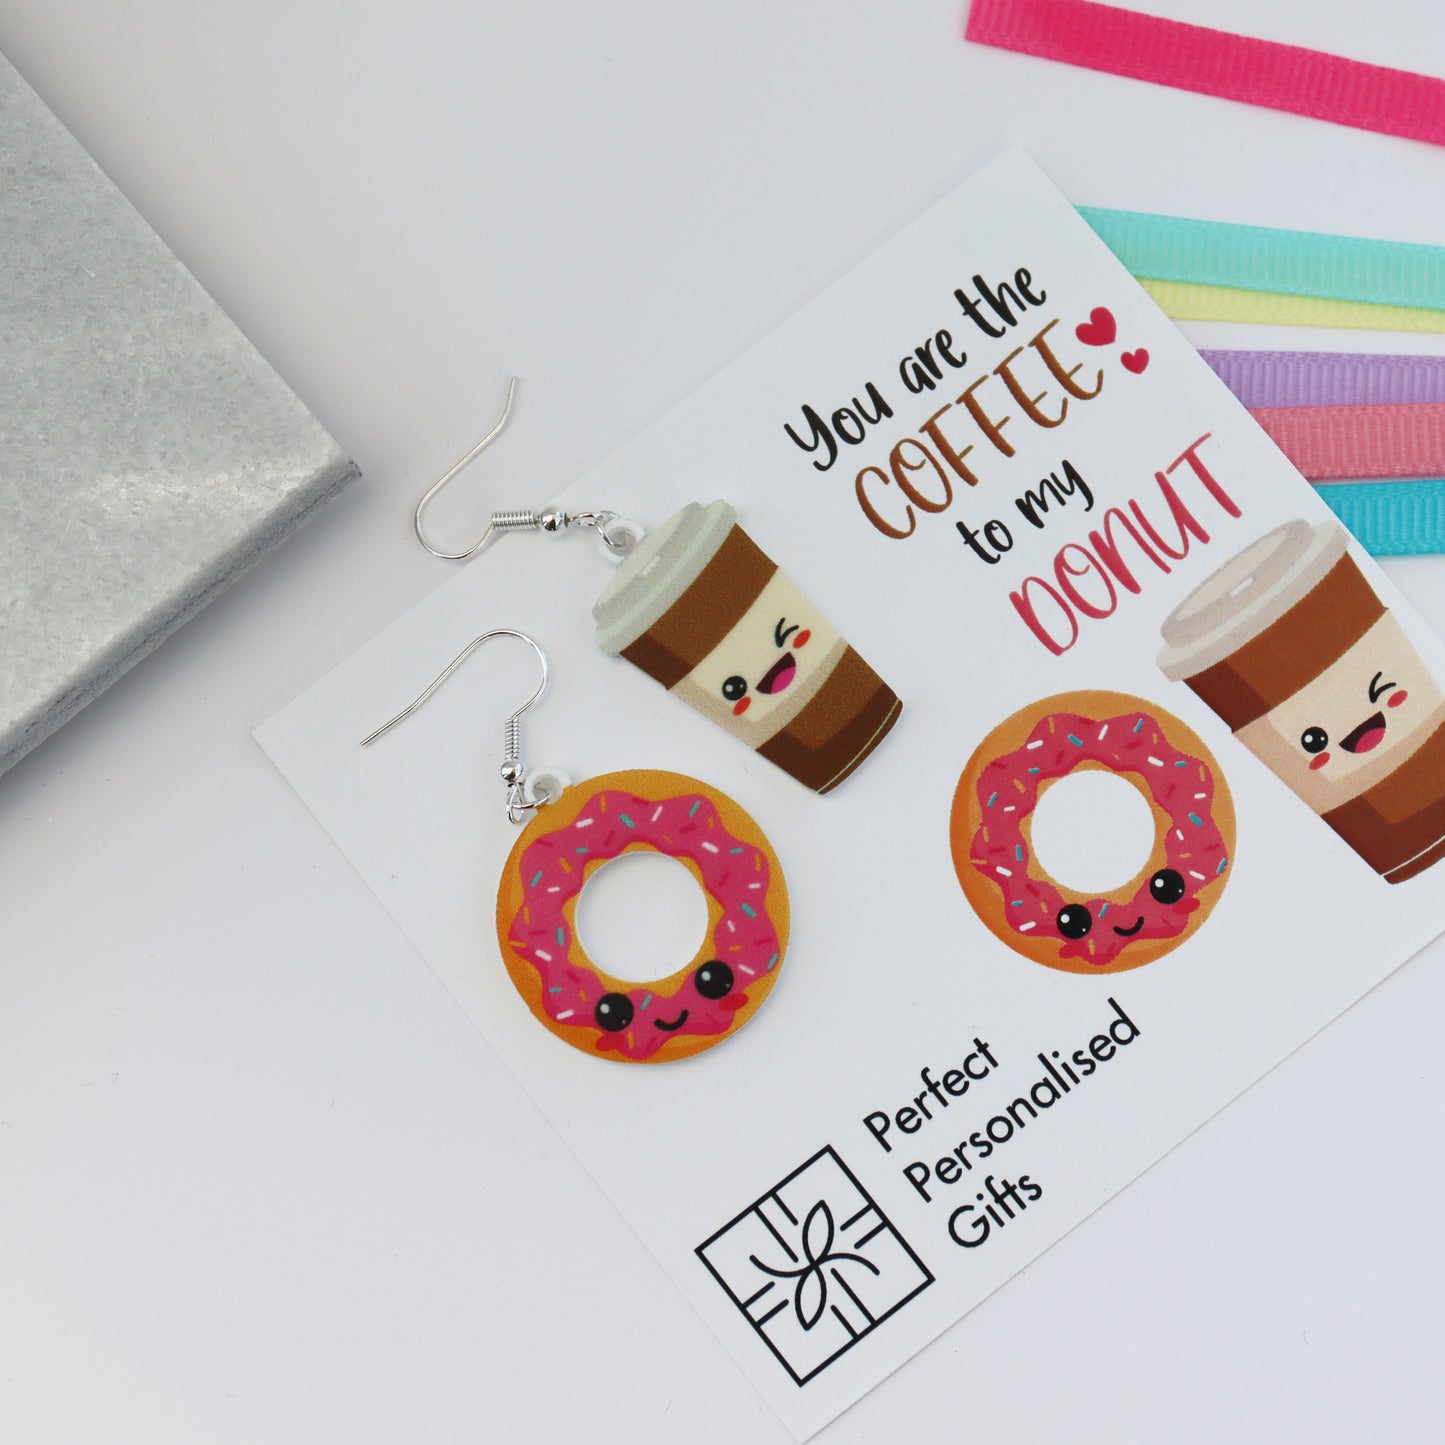 You Are The Coffee To My Donut Acrylic Earrings